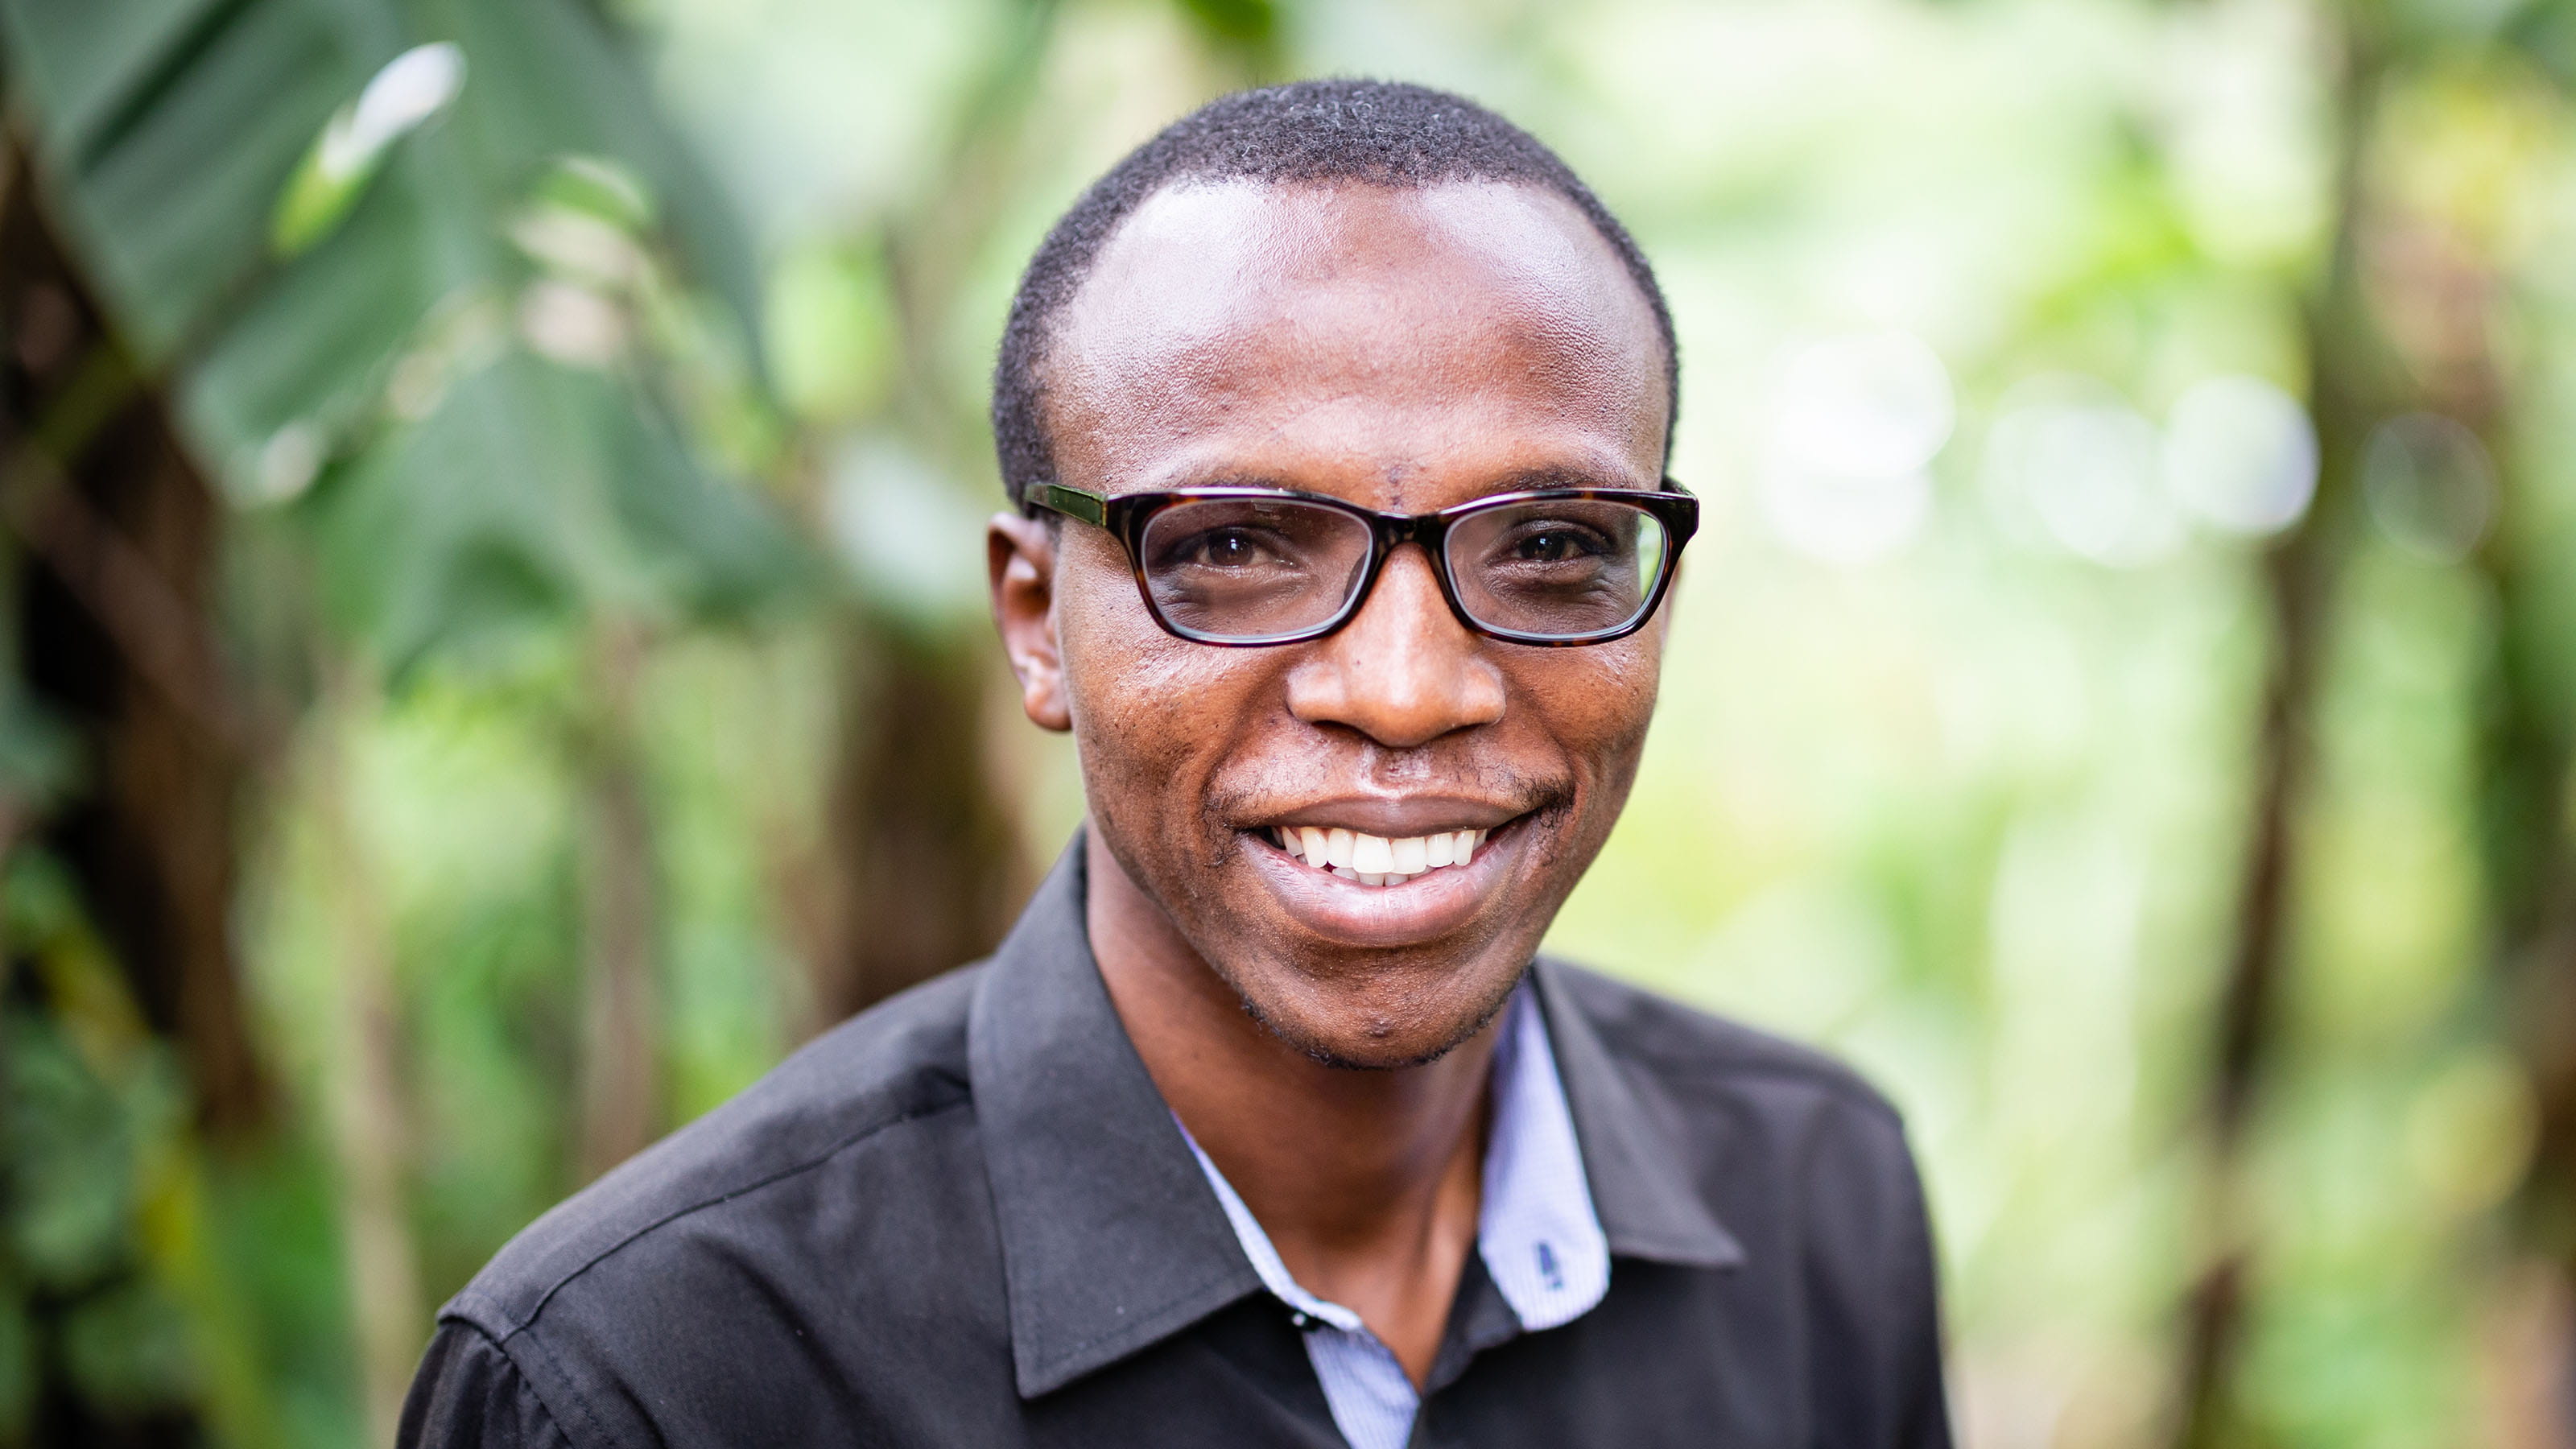 Close-up photo of a smiling African man wearing glasses with banana palms in the background. Gilbert Irahari, AEE - CCT Project Officer. Kigali, Rwanda.